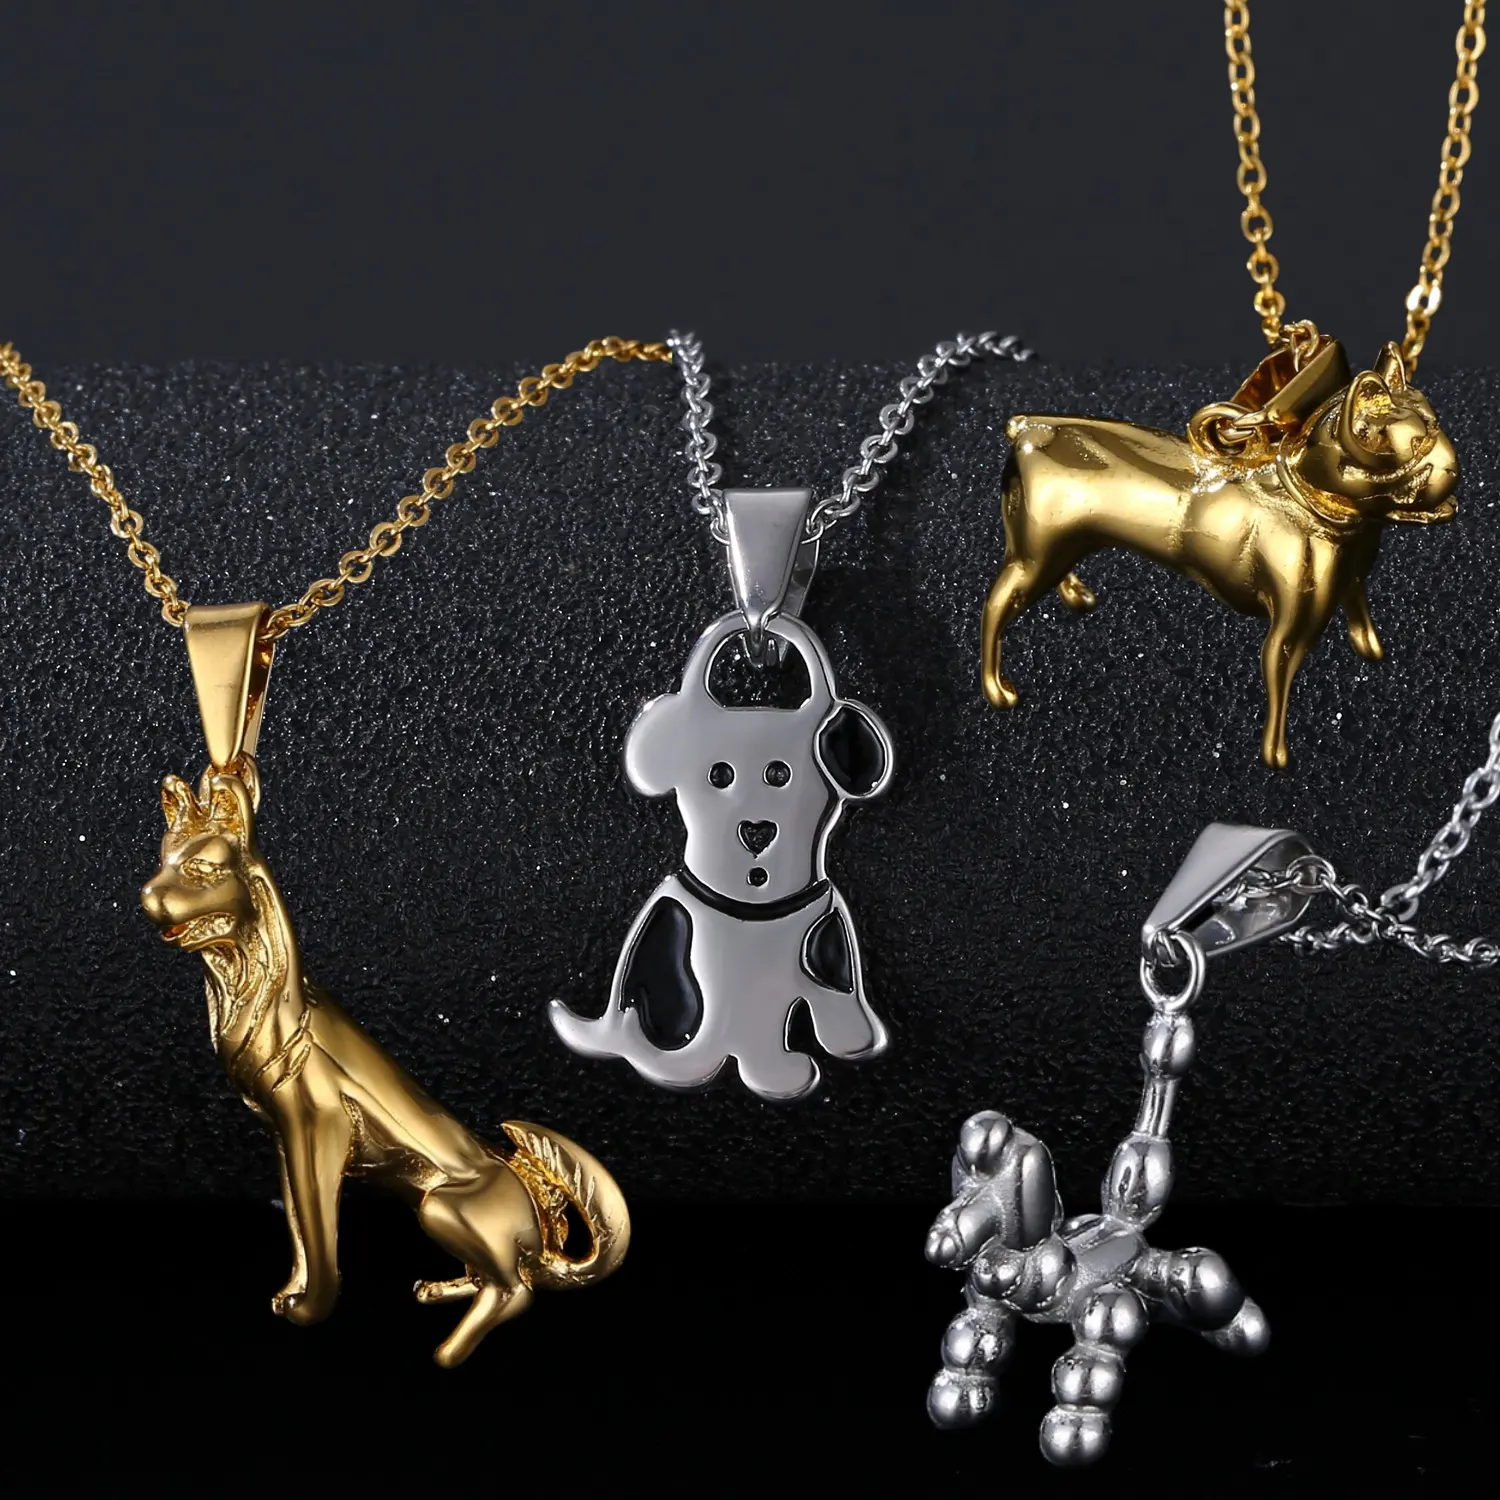 Olivia Animal Jewelry Pet Dog Designs 18k Gold Plated Stainless Steel Charm Puppy Pendant Necklaces Balloon Dog Necklace